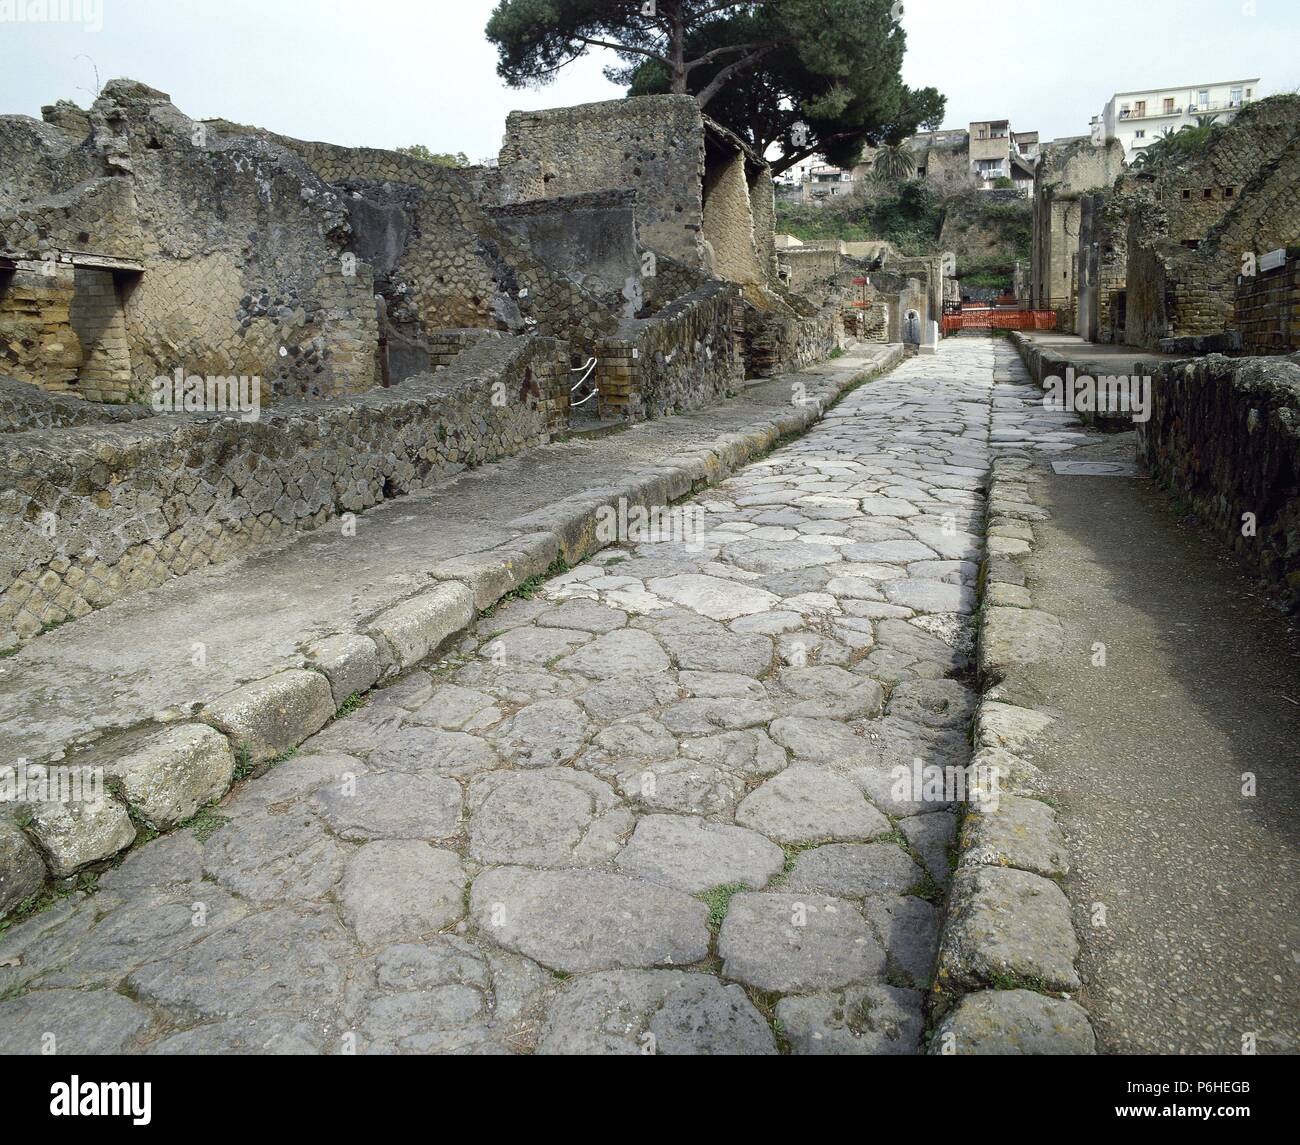 List 96+ Images what volcano destroyed the ancient roman town of herculaneum Latest